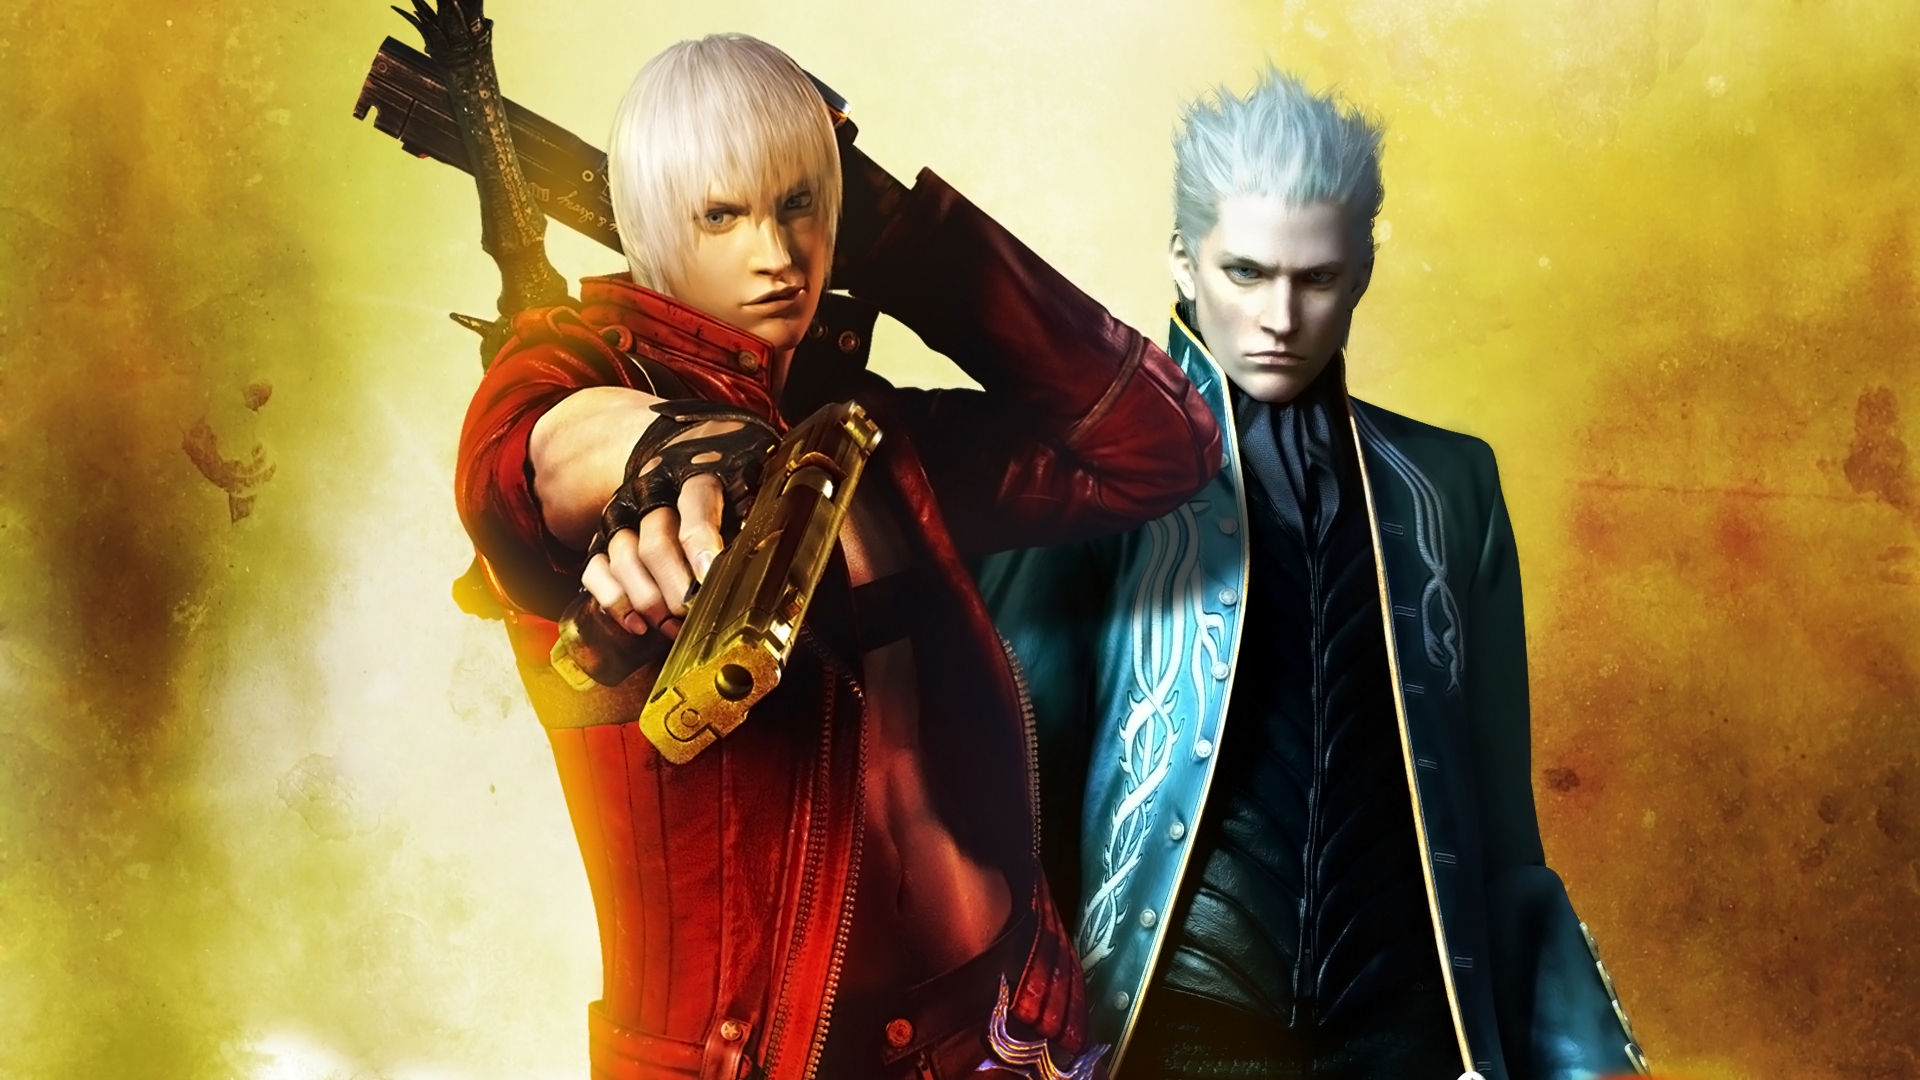 Devil May Cry 3: Dante's Awakening: Special Edition